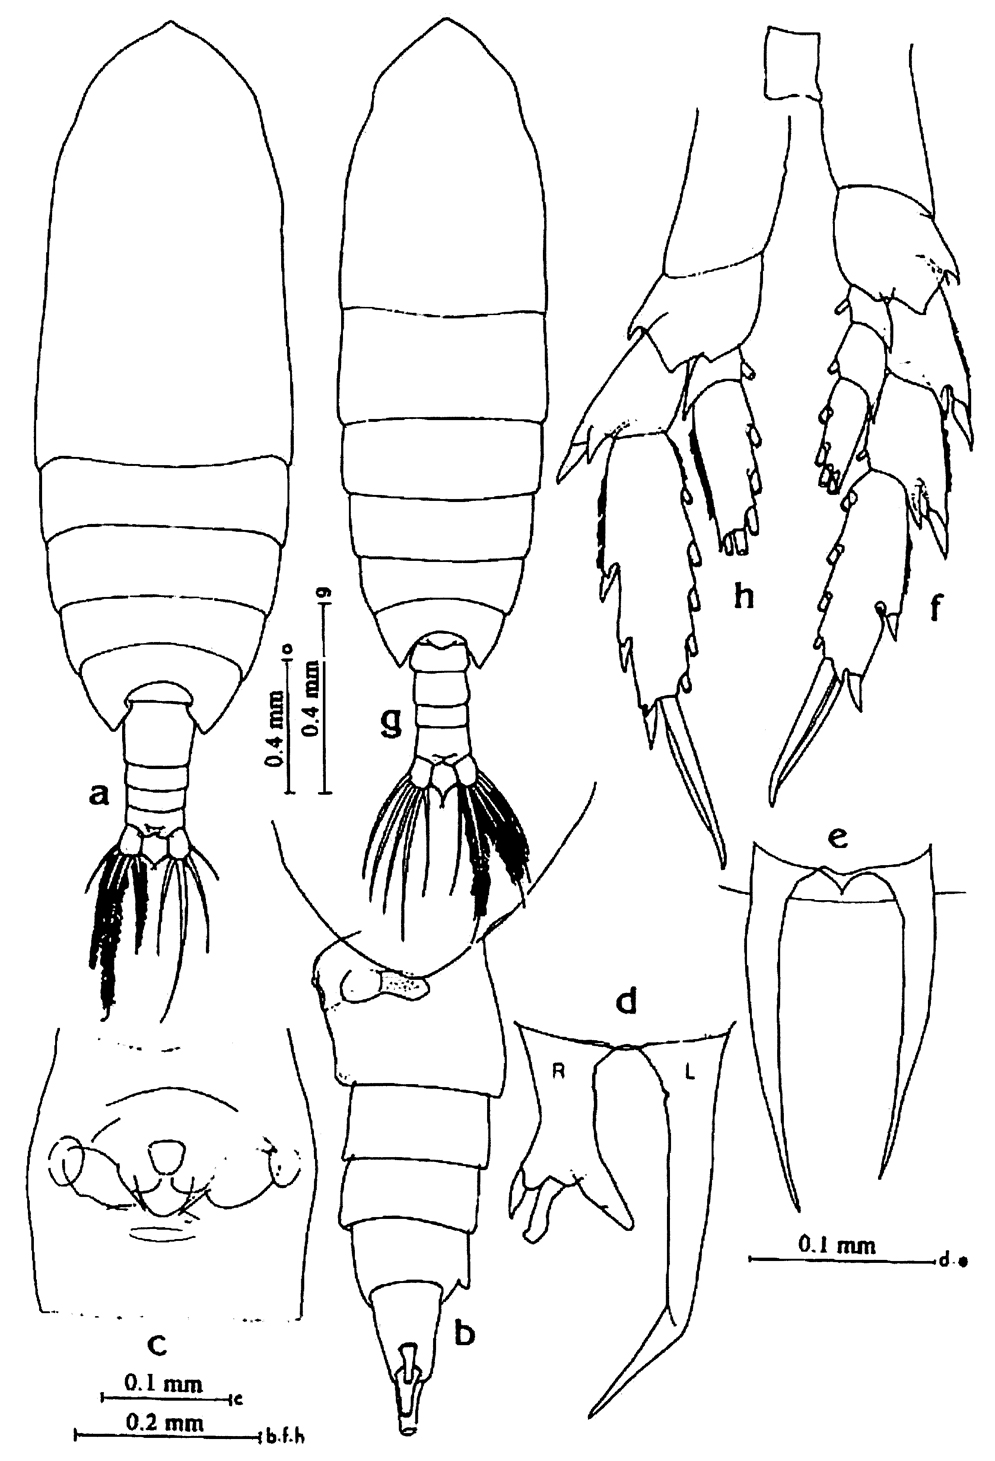 Species Calanoides philippinensis - Plate 7 of morphological figures